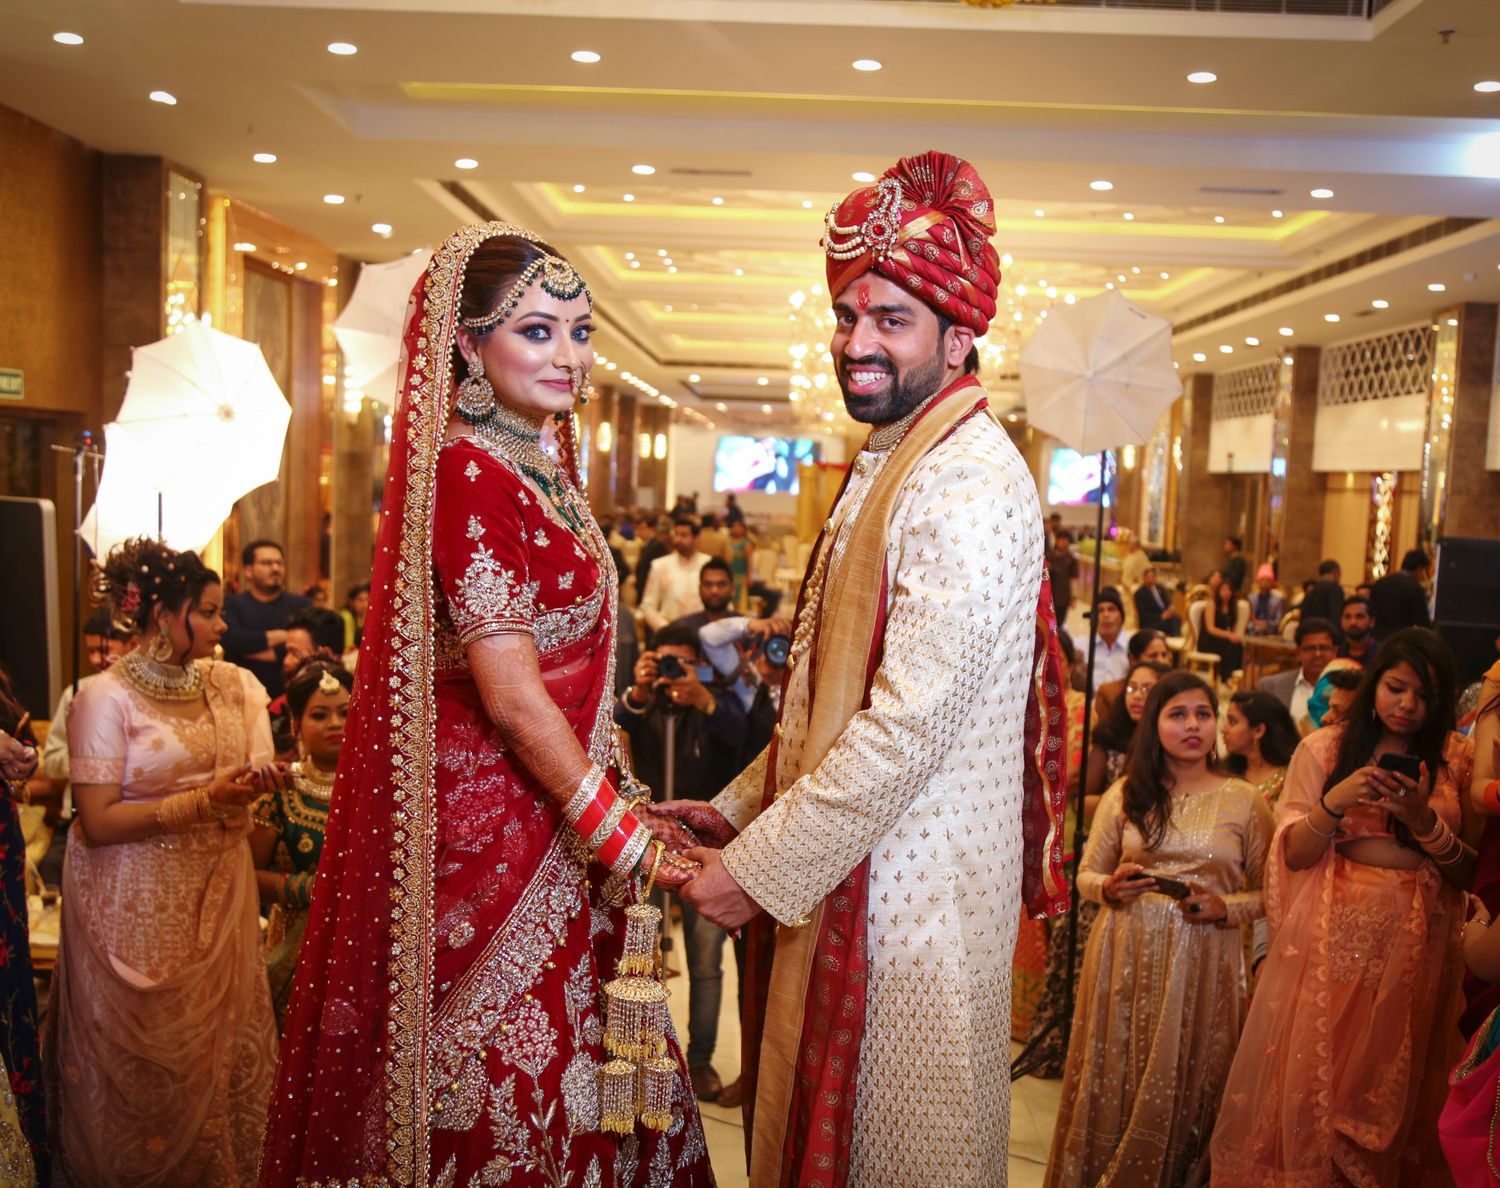 The Ultimate Guide to Decoding Indian Wedding Dress Codes